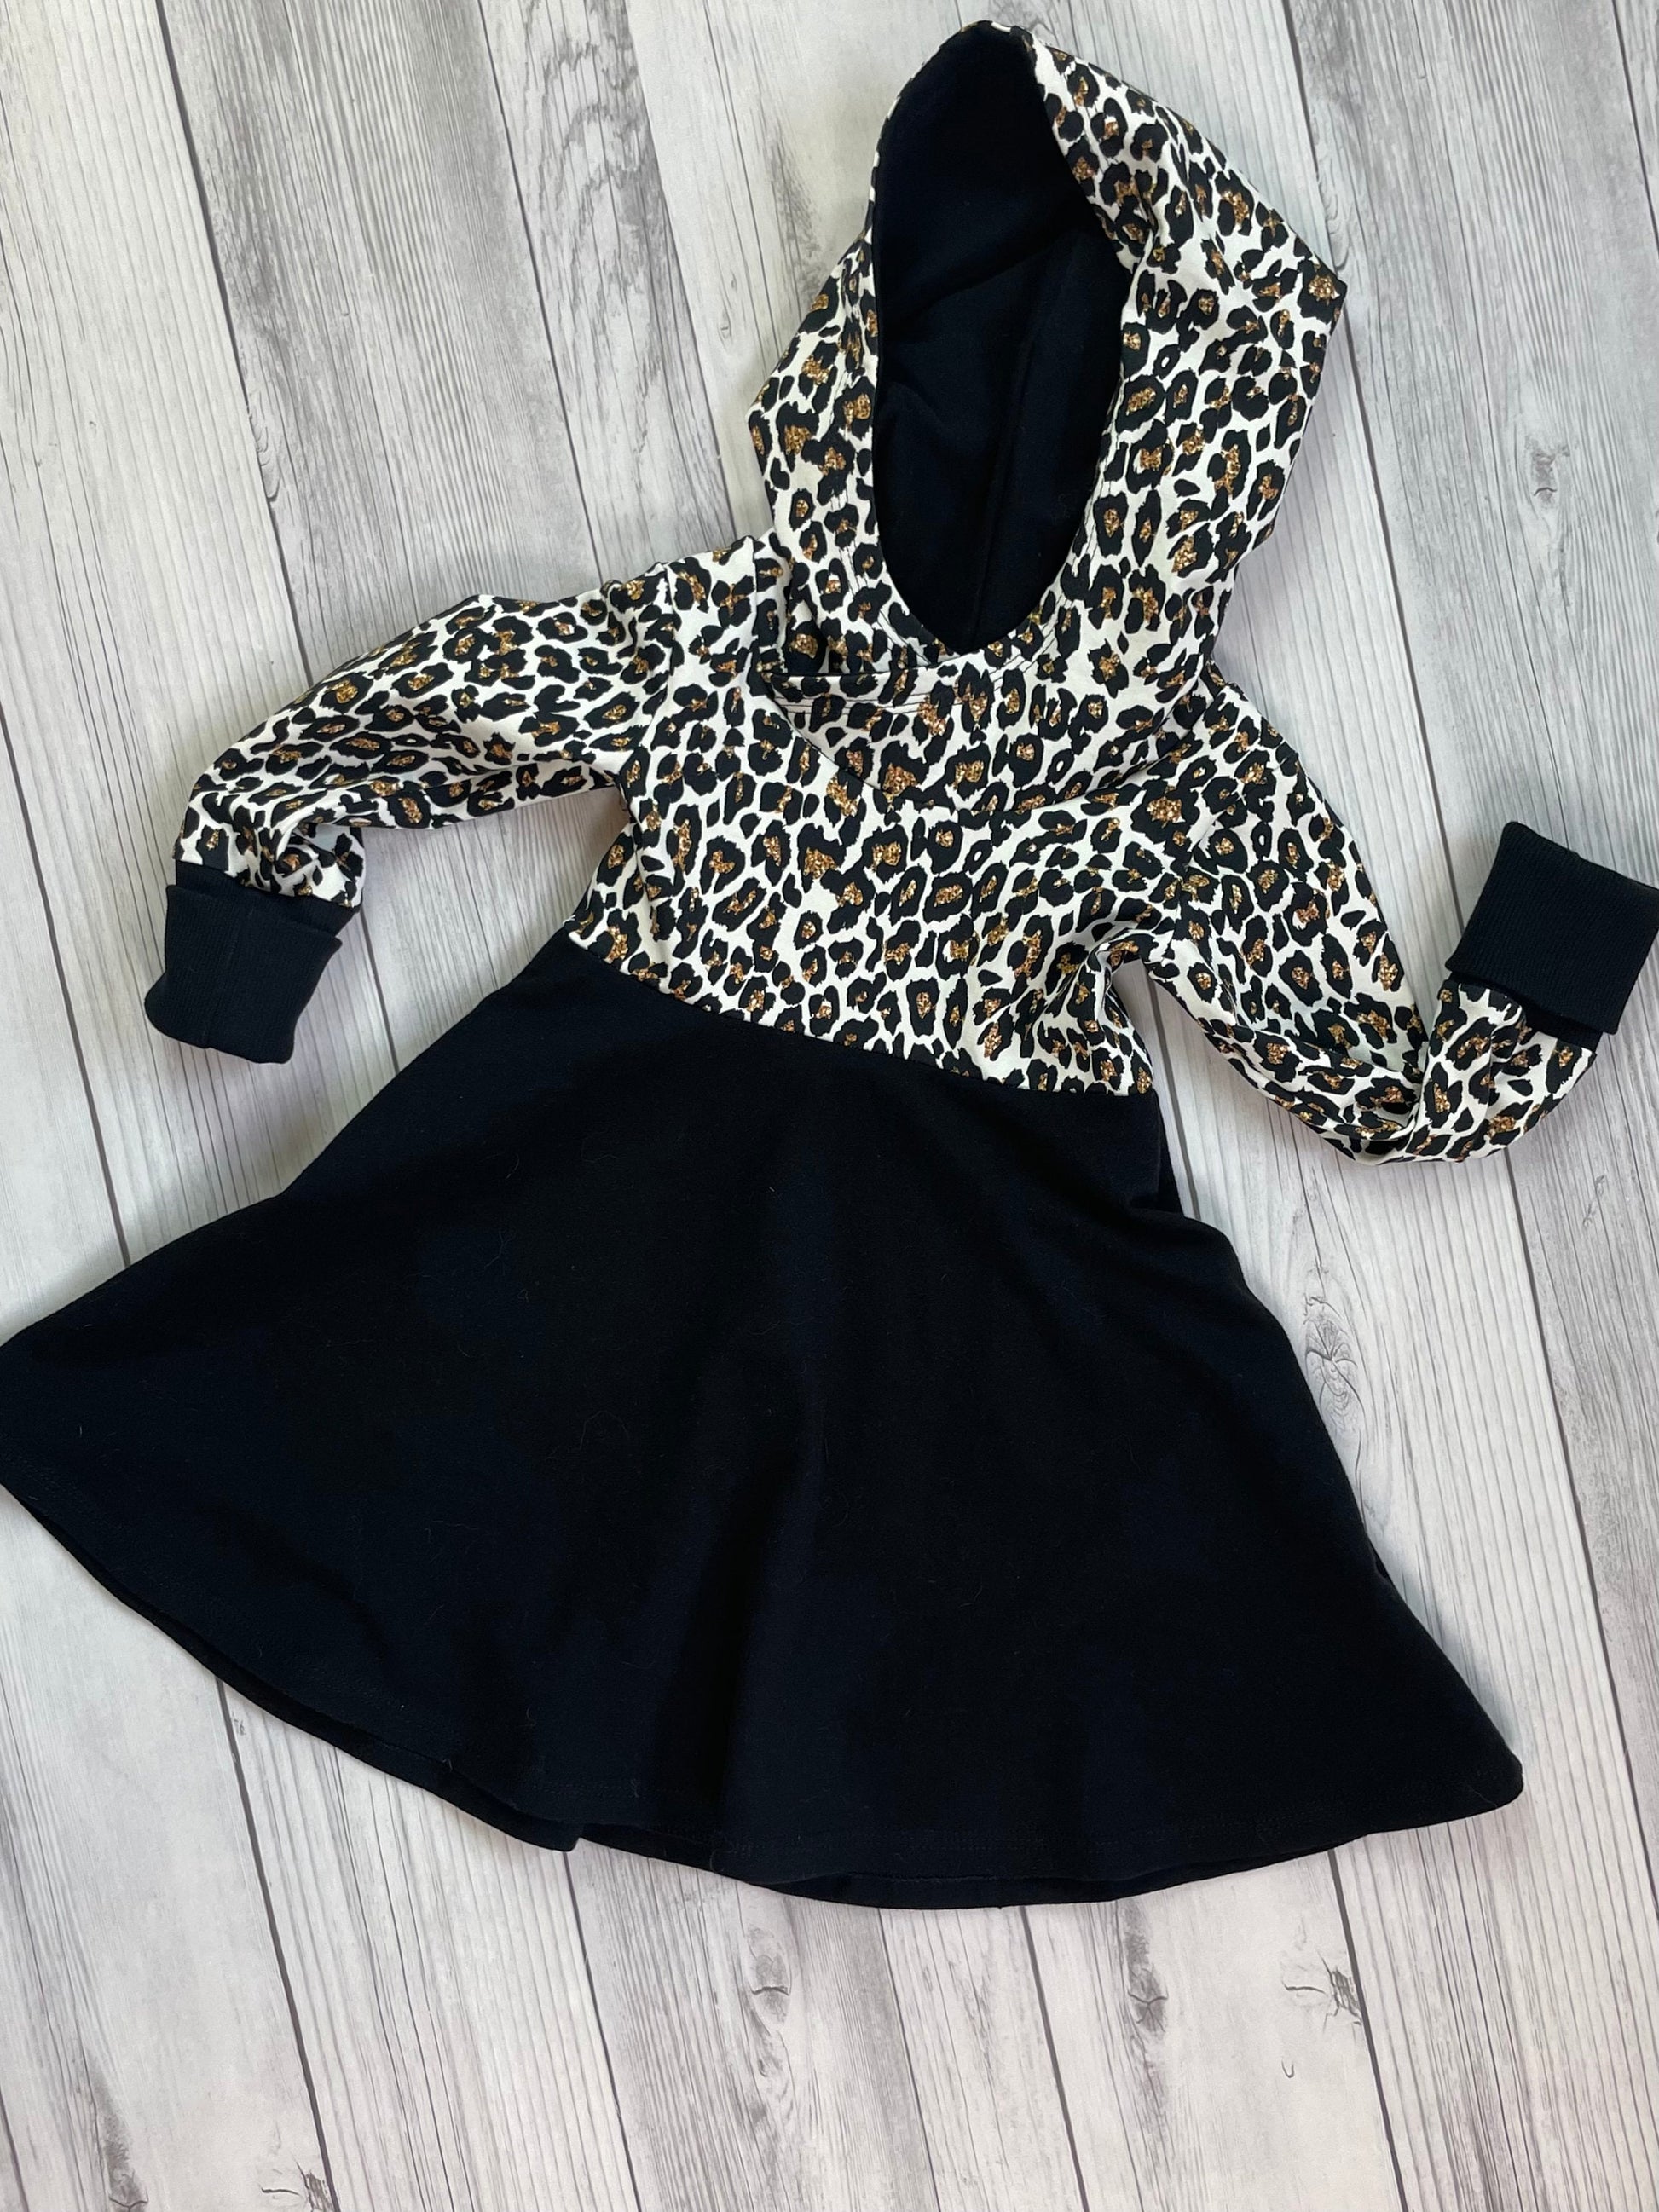 Leopard, Leopard Dress, Animal Print, Hoodie, Hooded Dress, Grow with me Clothes, Back to School, Black Dress, Organic Cotton, Dress, Sleeve